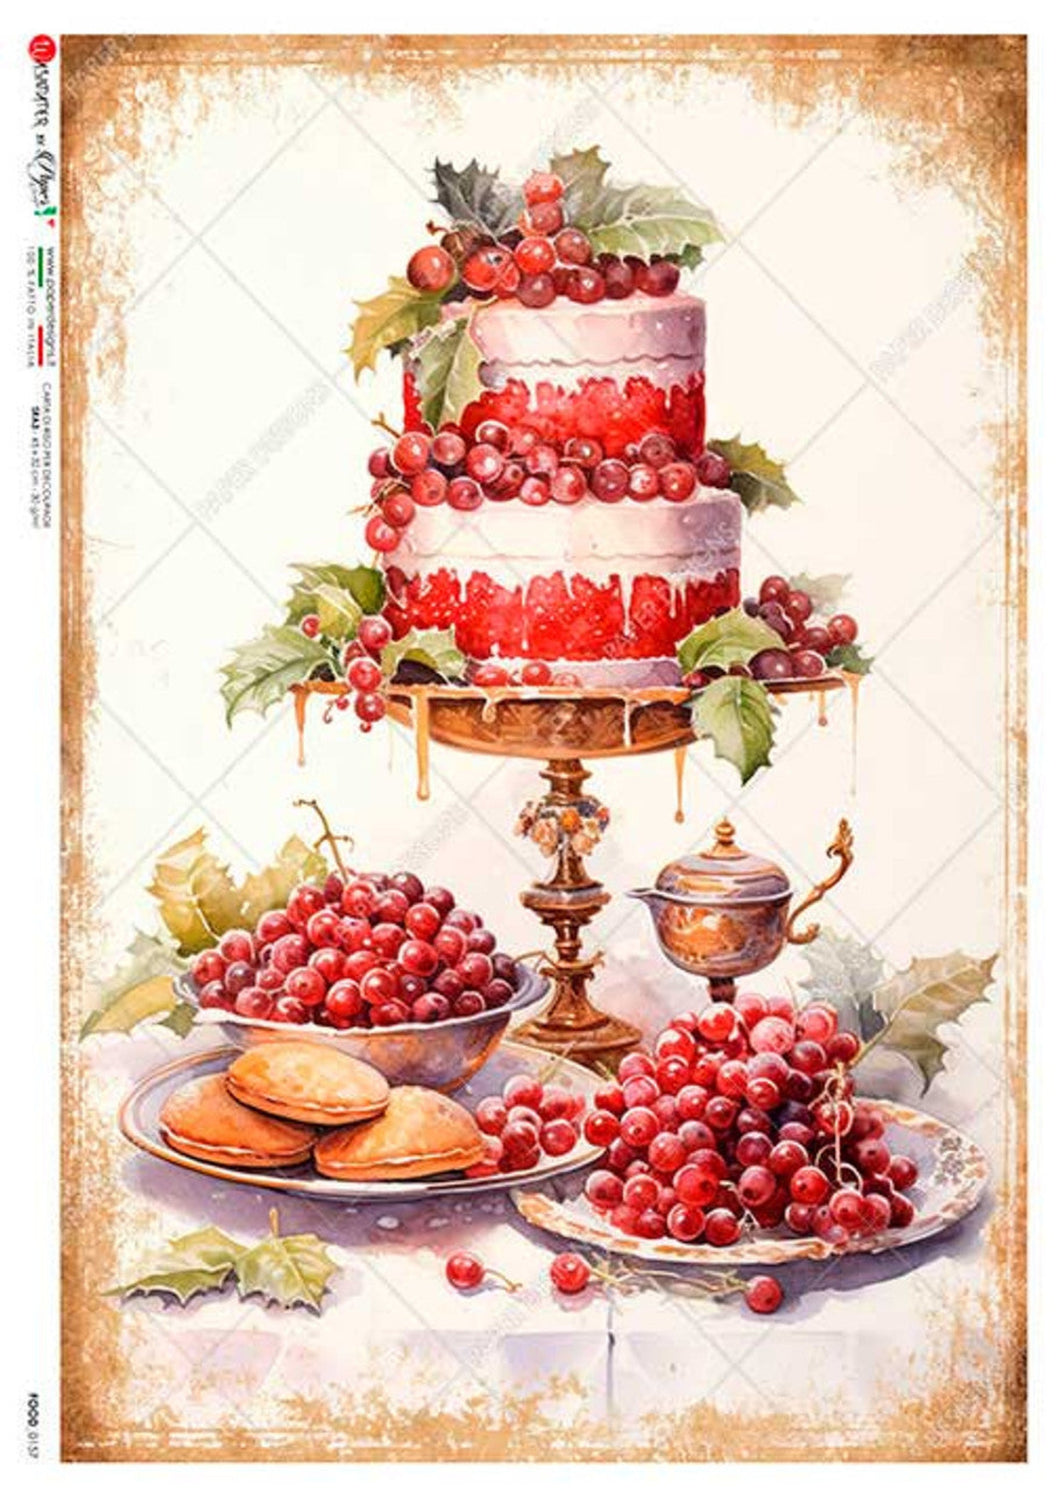 Food 0157 Paper Designs Washipaper, Tiered Festive Cake